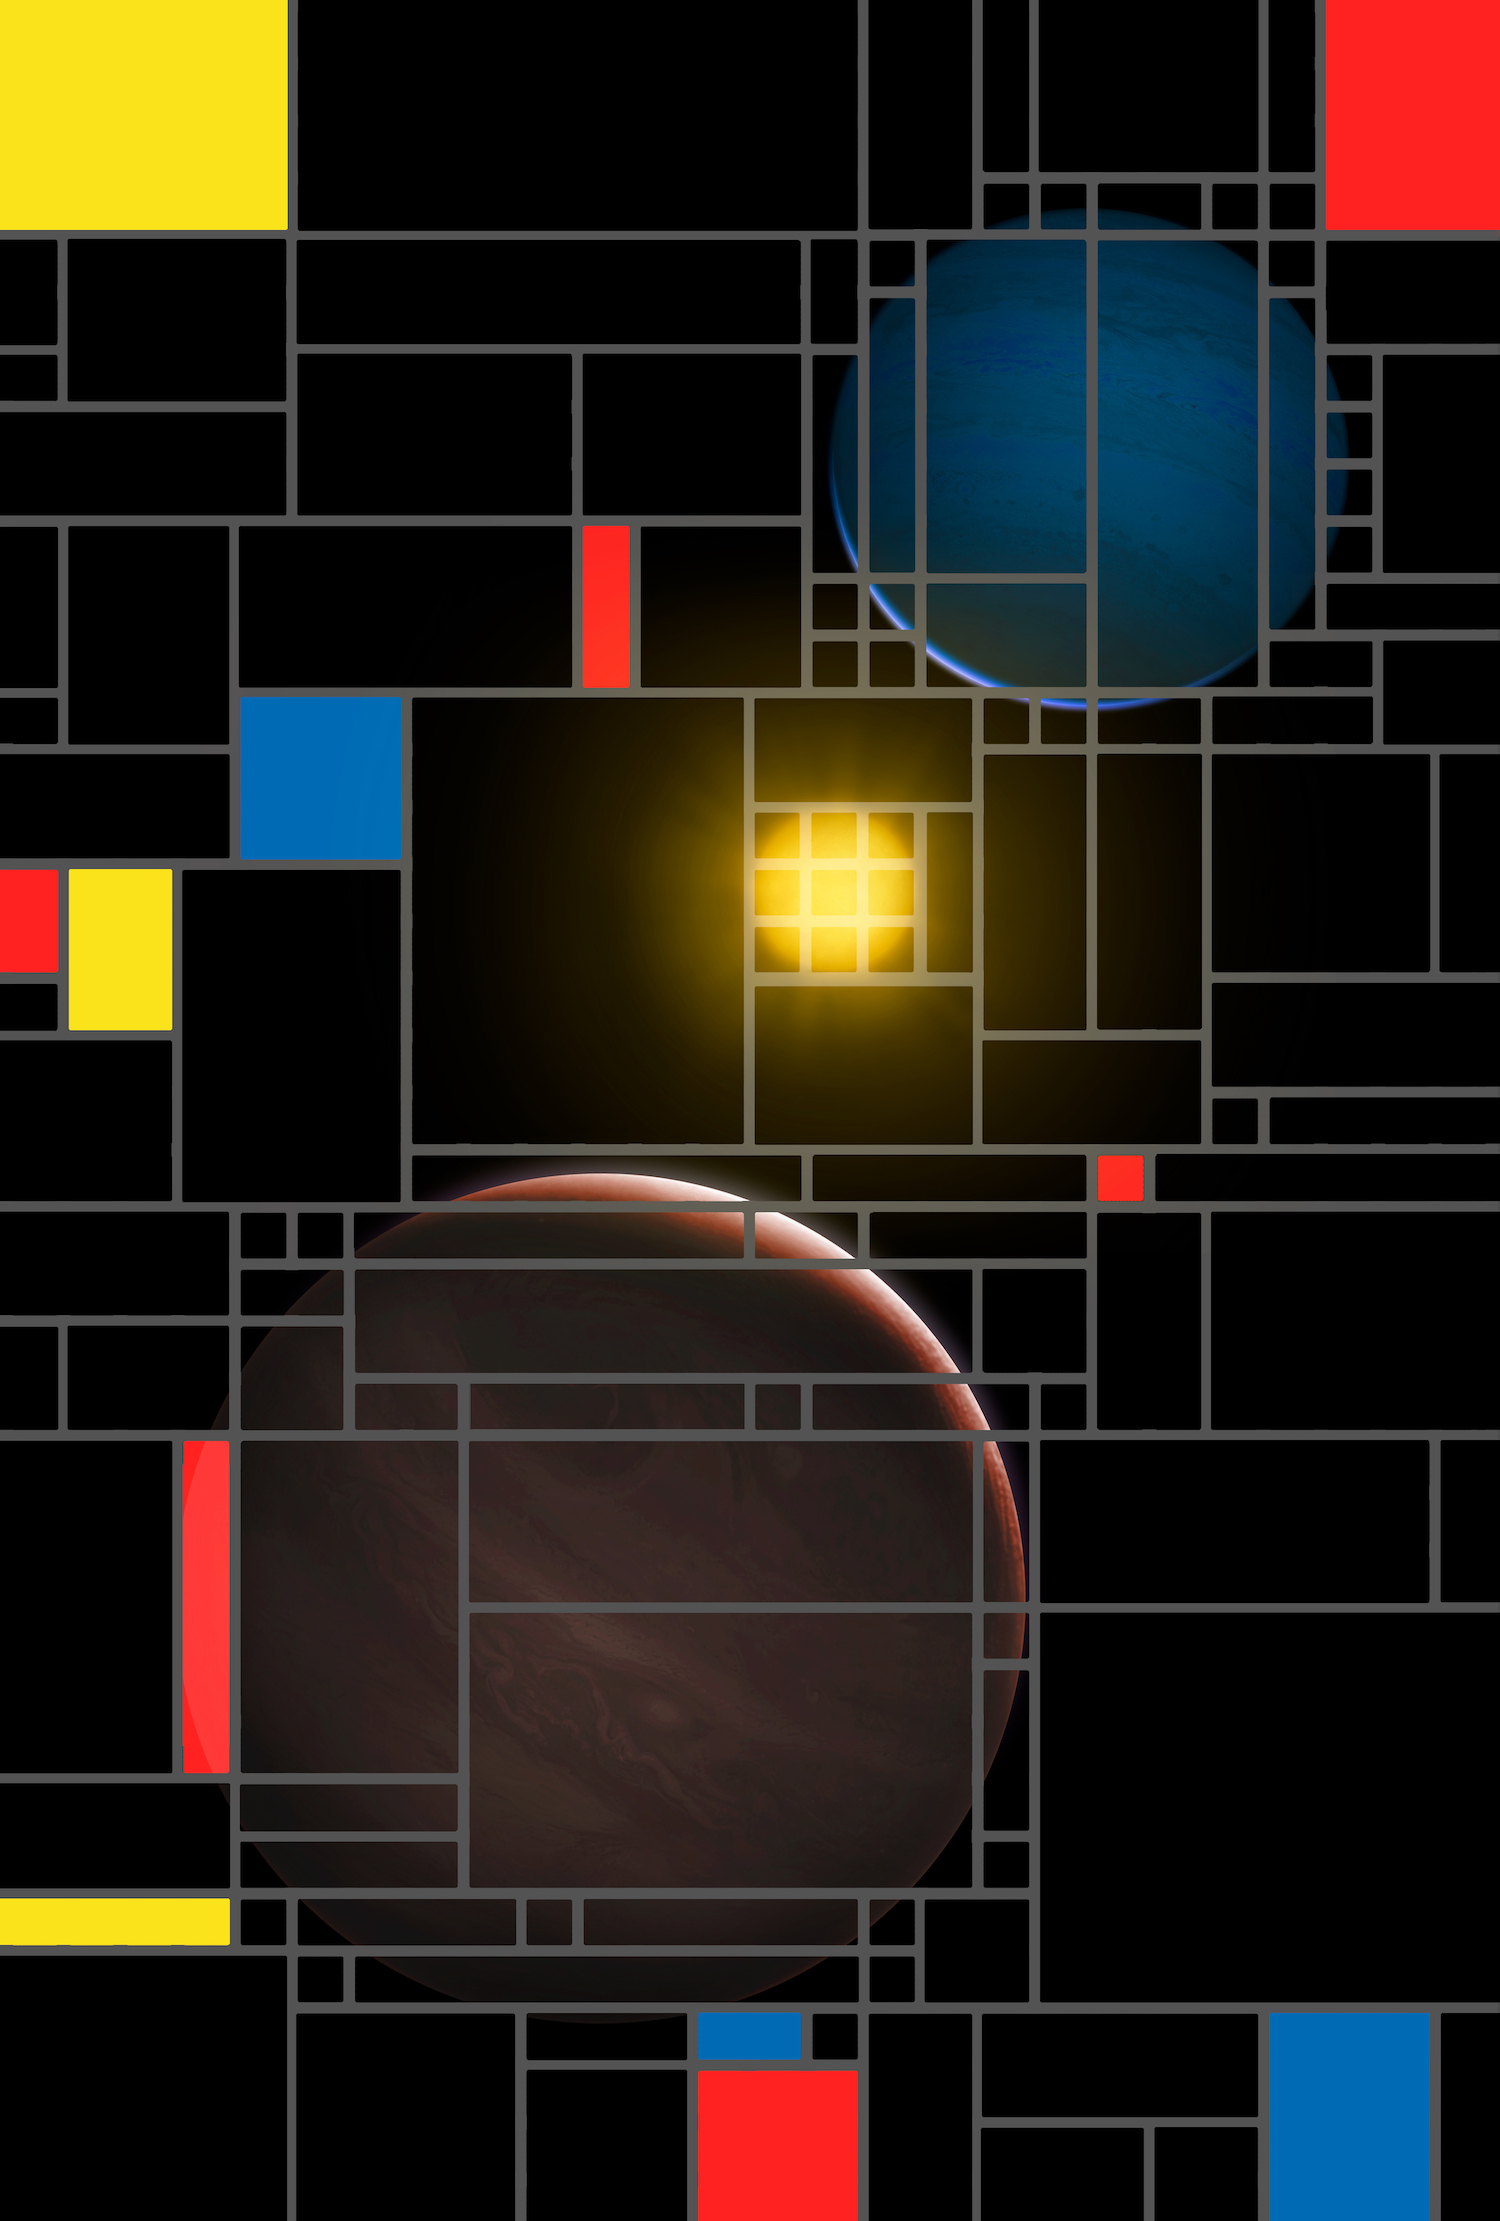 YSES 2b exoplanet system interpreted in the style of Mondrian